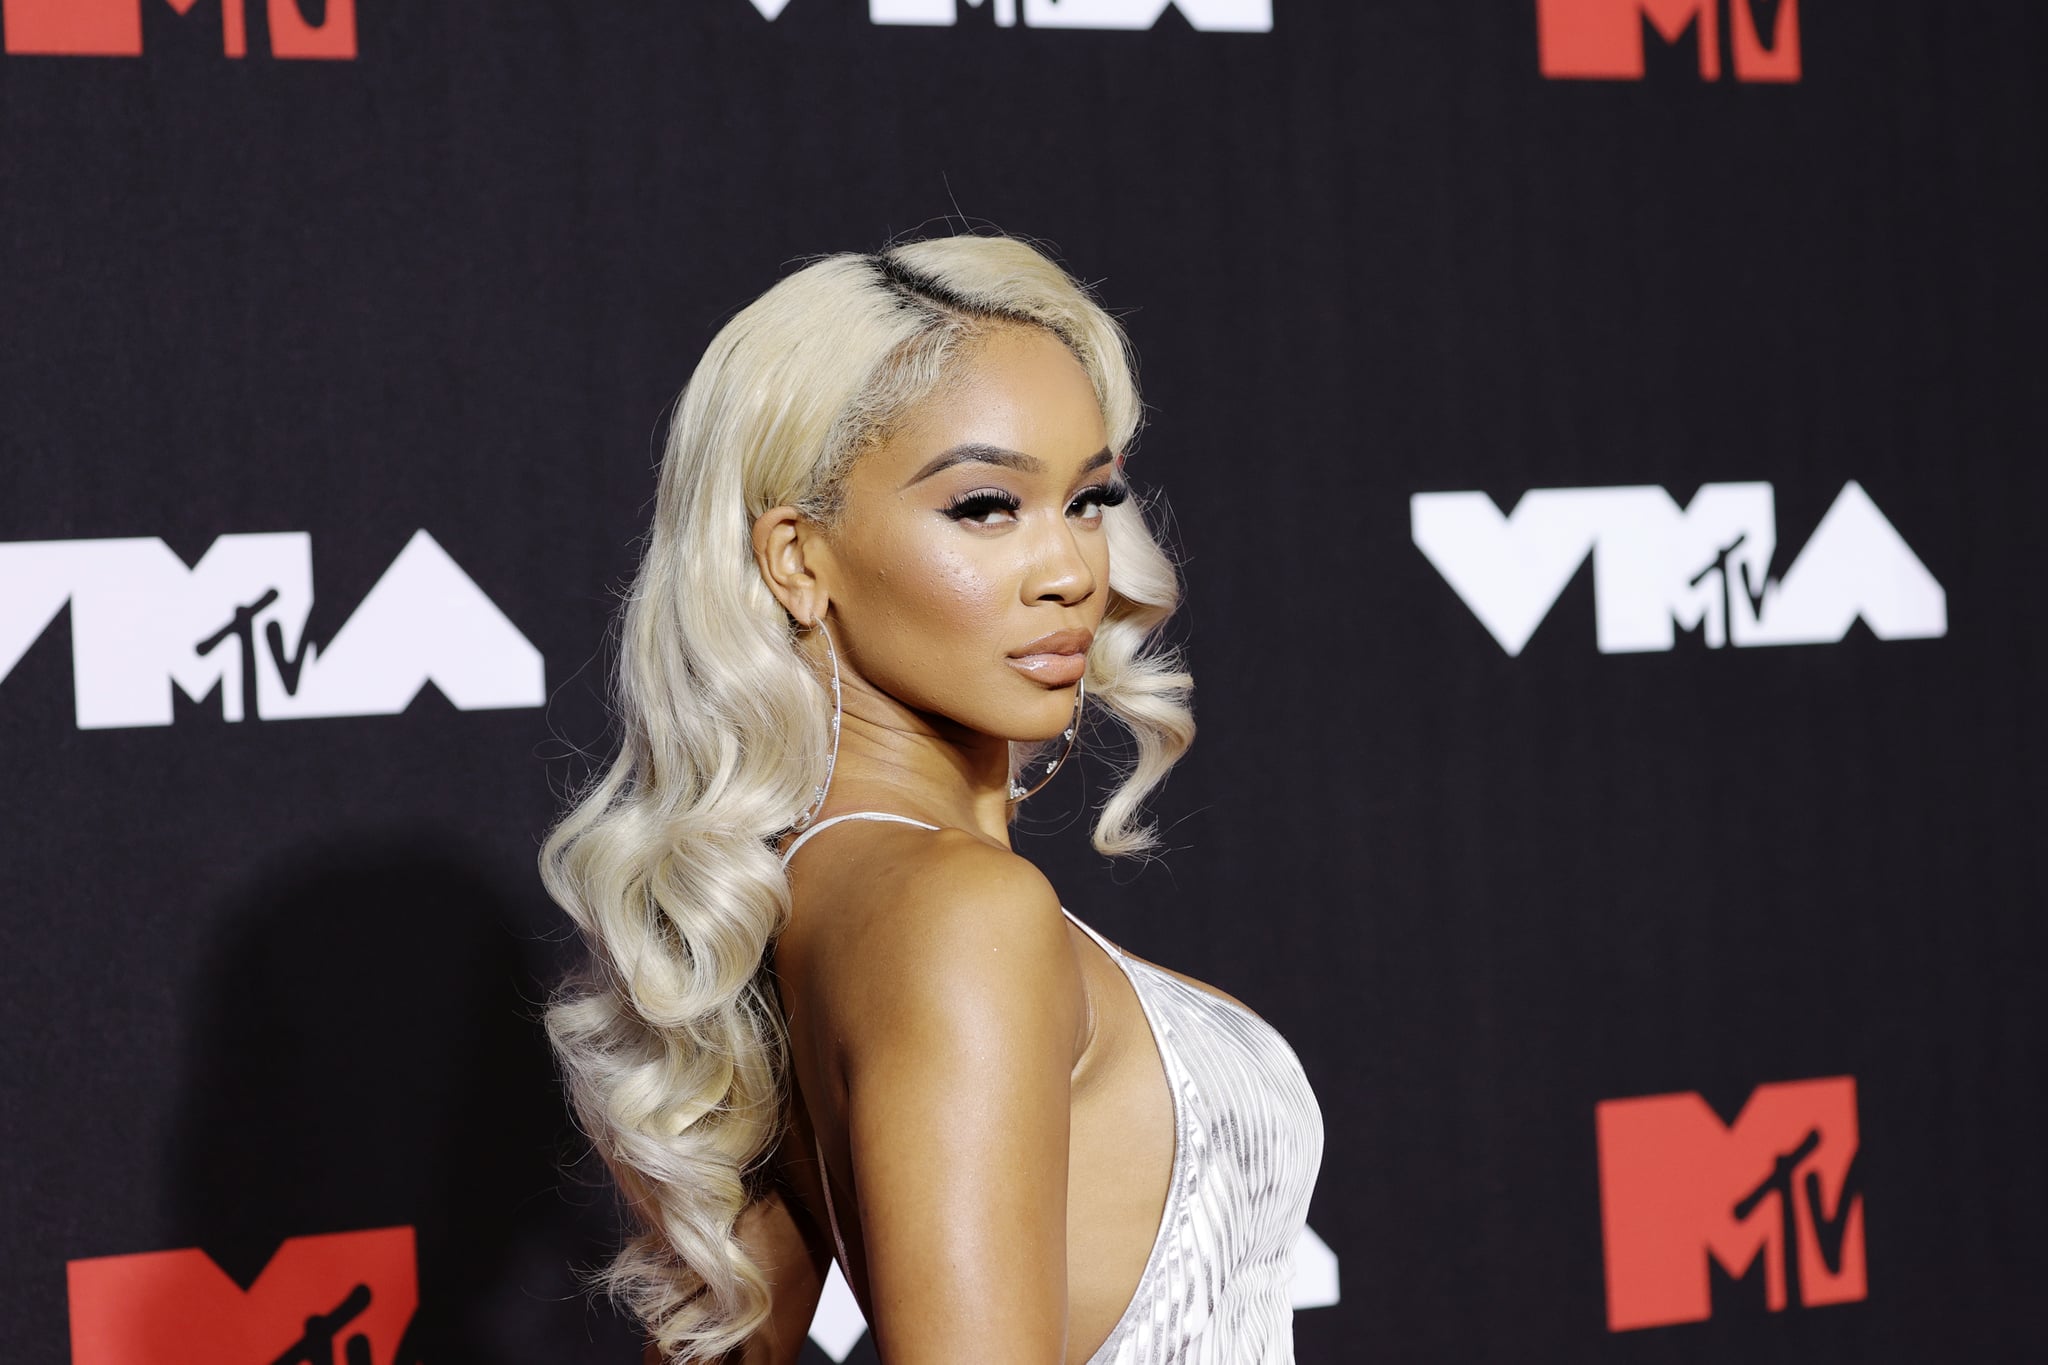 NEW YORK, NEW YORK - SEPTEMBER 12: Saweetie attends the 2021 MTV Video Music Awards at Barclays Centre on September 12, 2021 in the Brooklyn borough of New York City. (Photo by Jamie McCarthy/Getty Images for MTV/ ViacomCBS)